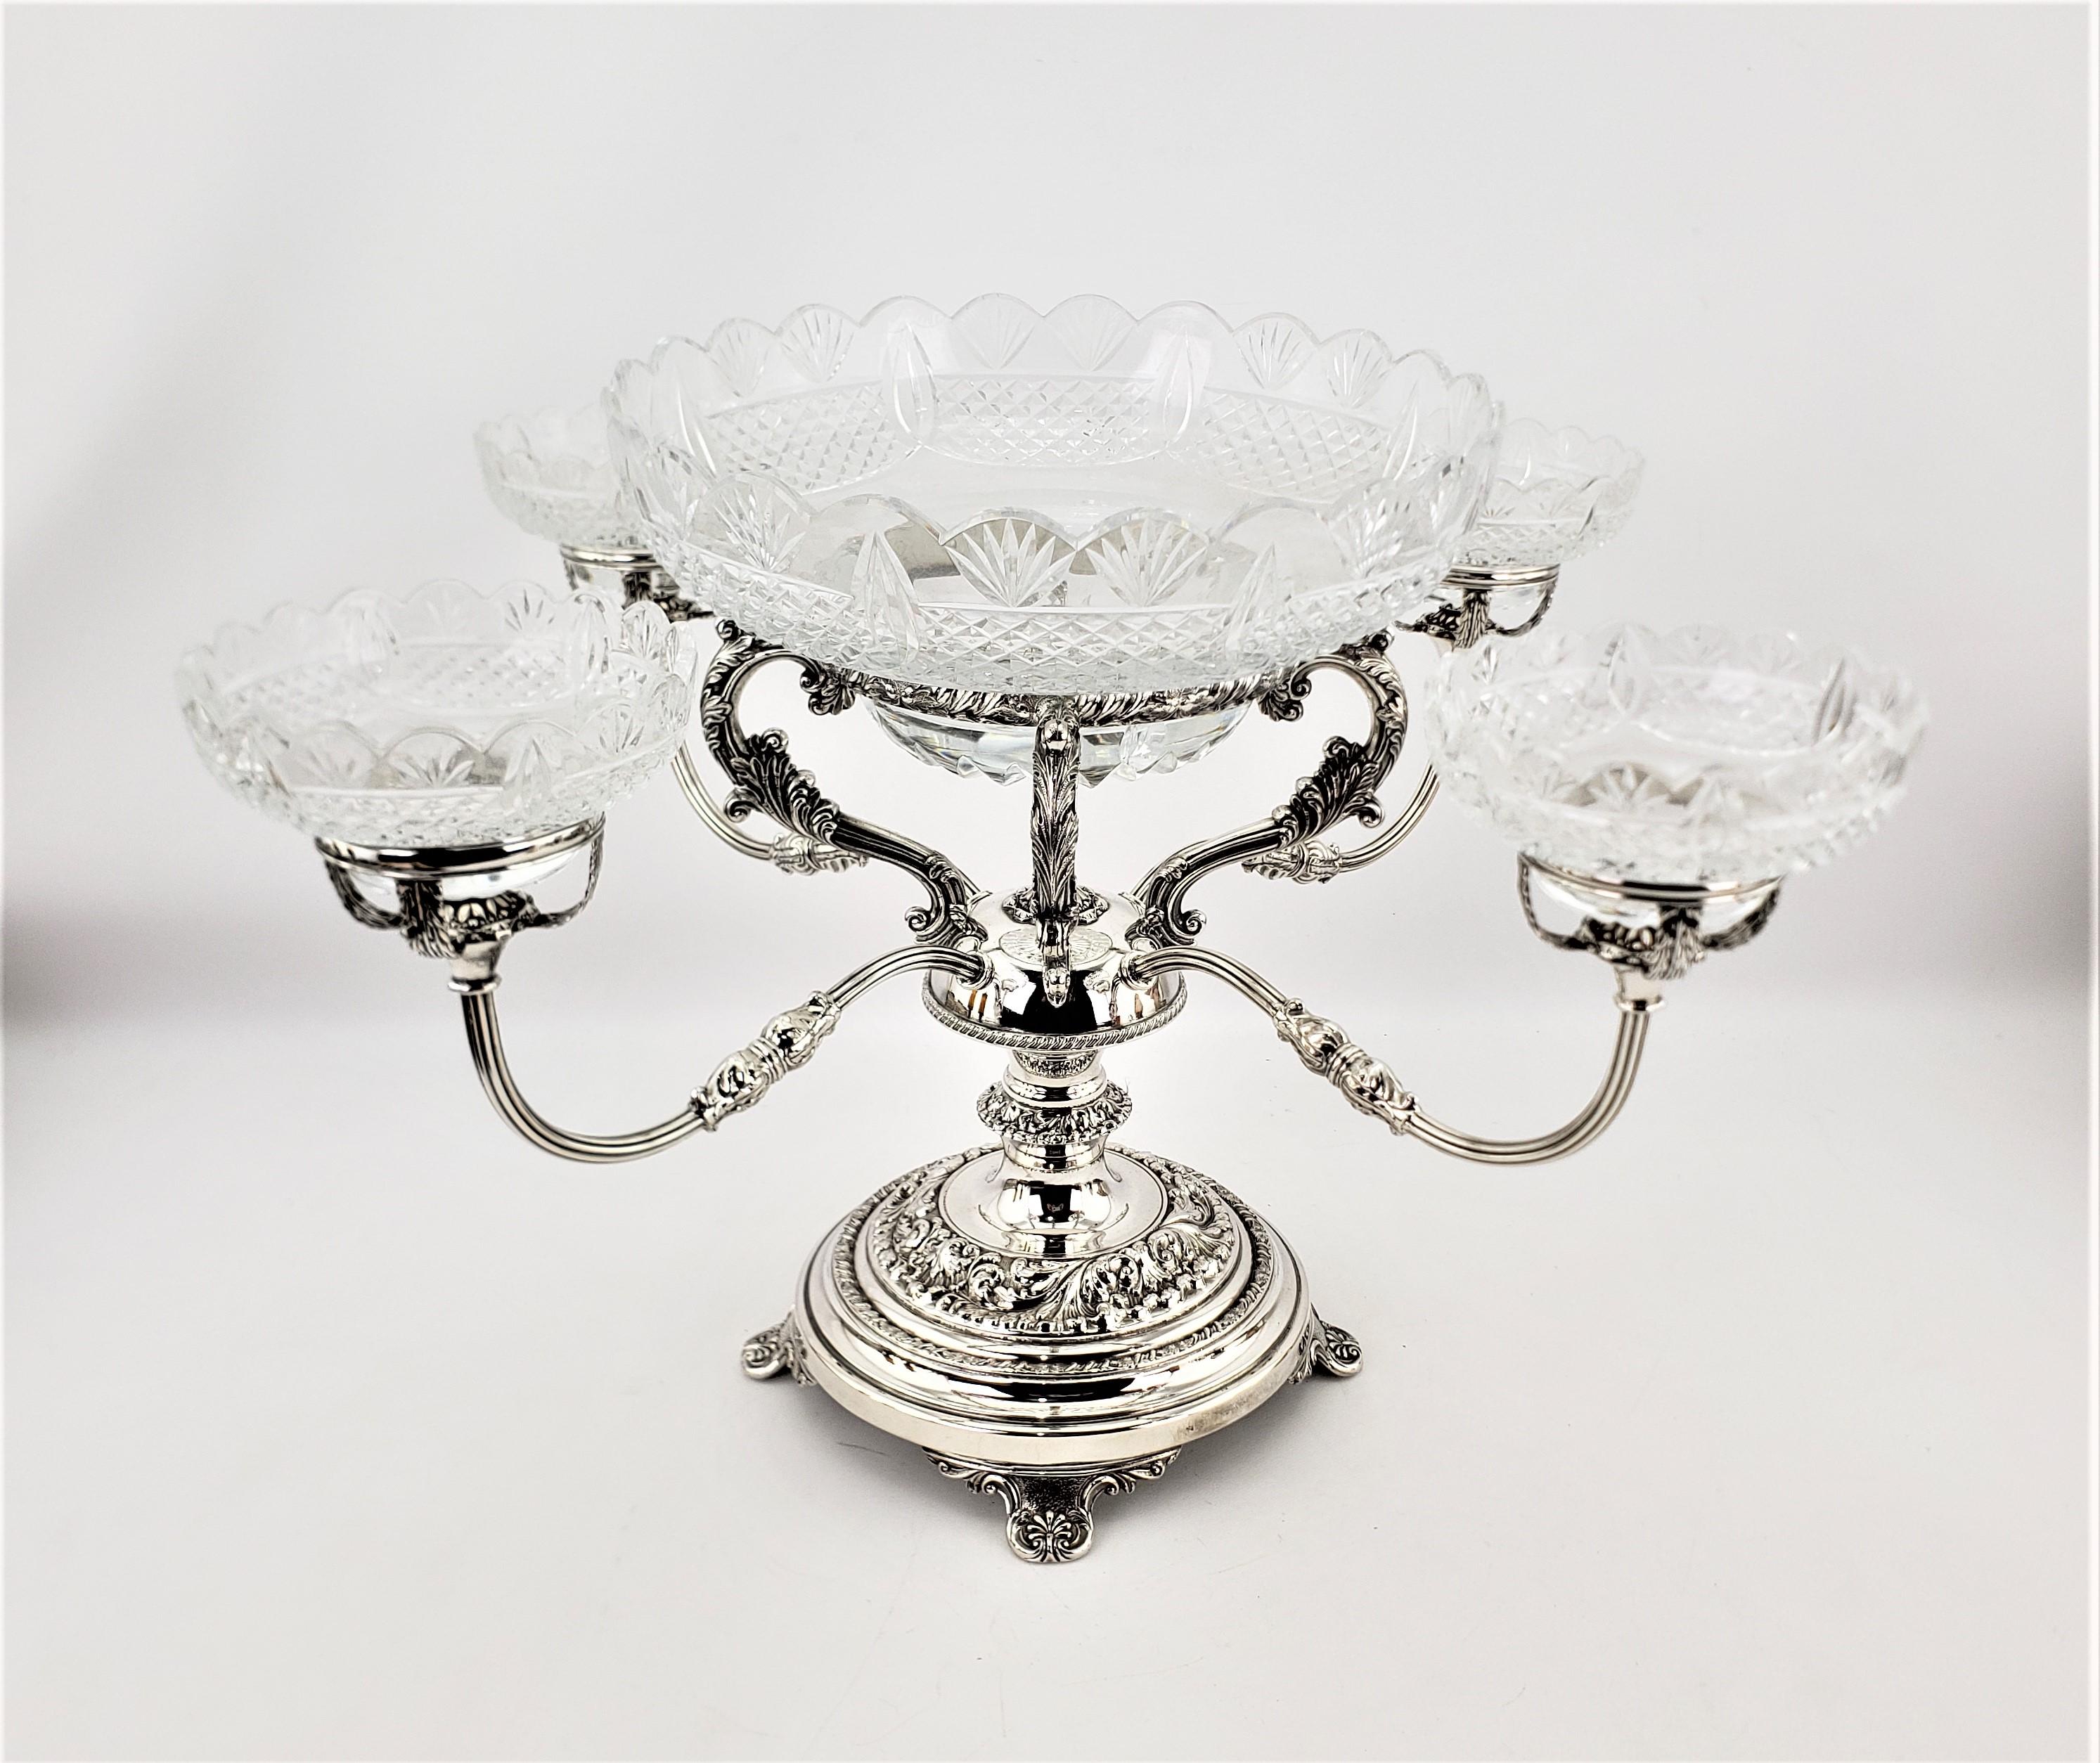 This large and imposing silver plated four arm centerpiece is unsigned, but presumed to have originated from England and dating to approximately 1900, being done in the period Edwardian style. This very well plated four arm convertible centerpiece